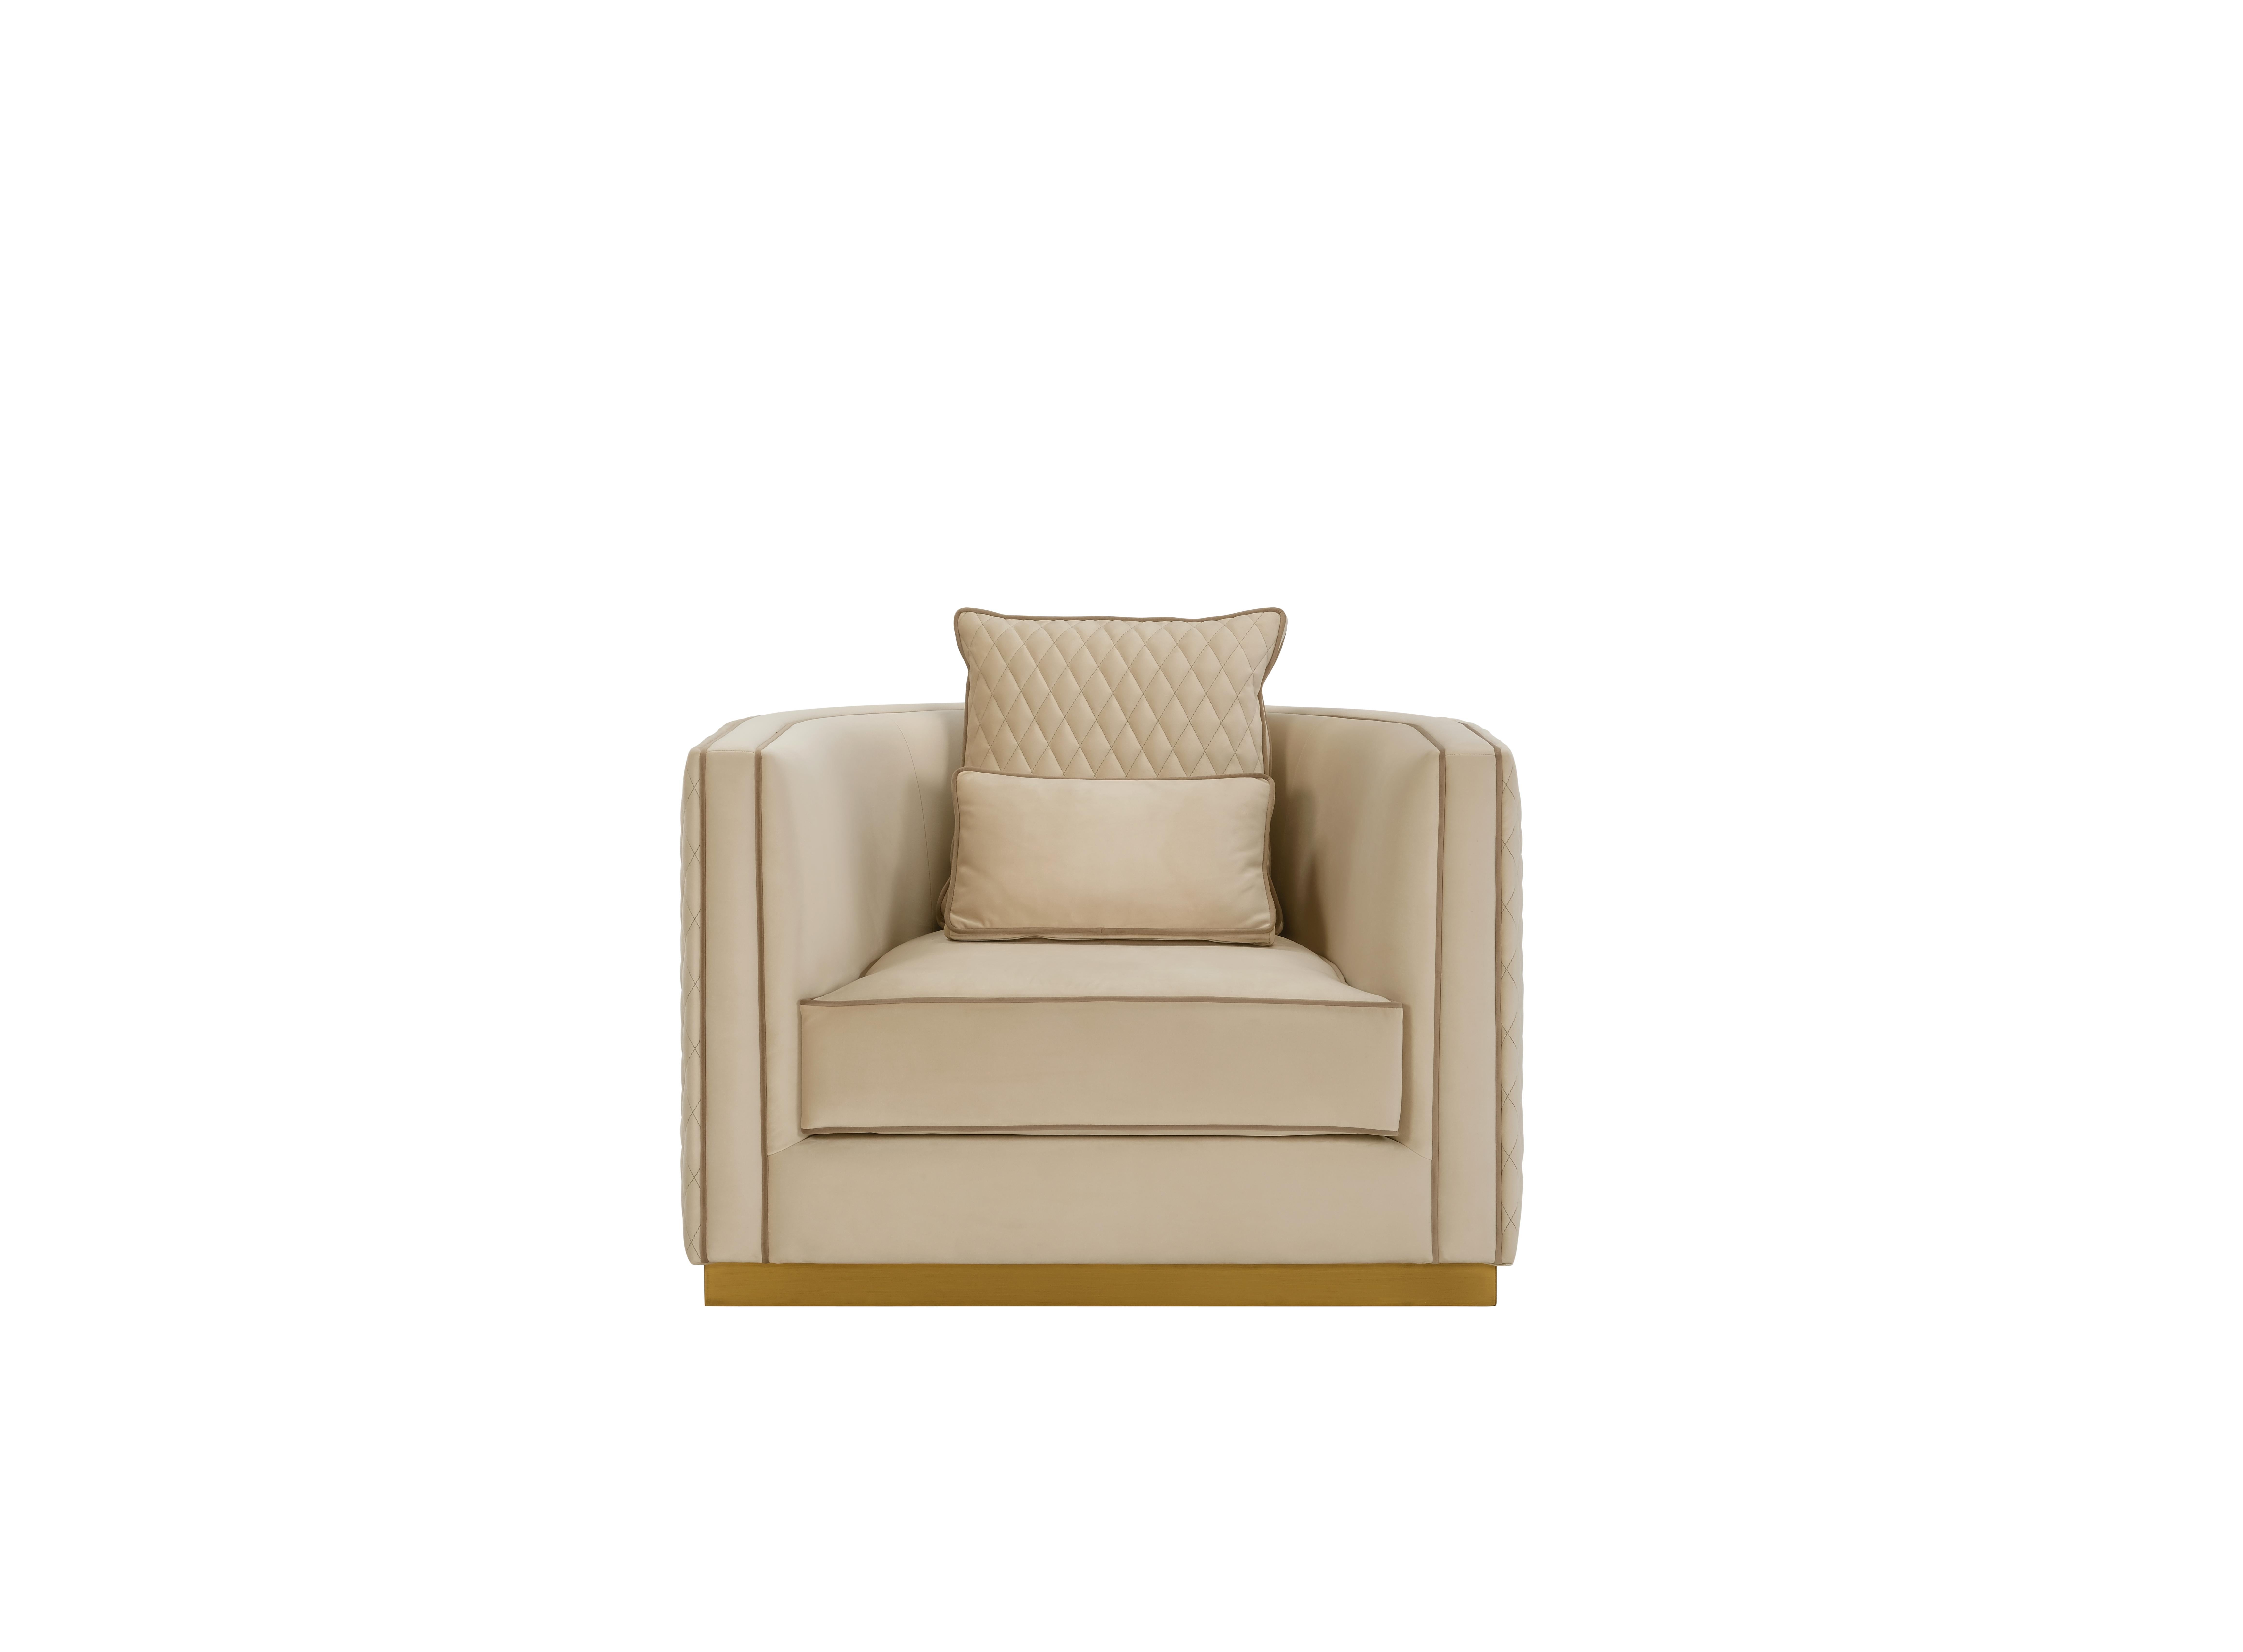 GRANT is a distinguished armchair, with an enveloping backrest and an extremely refined design, complemented by feather-composed cushions for a superior comfort feeling. Grant allows the combination of different textures on the back and cushions,